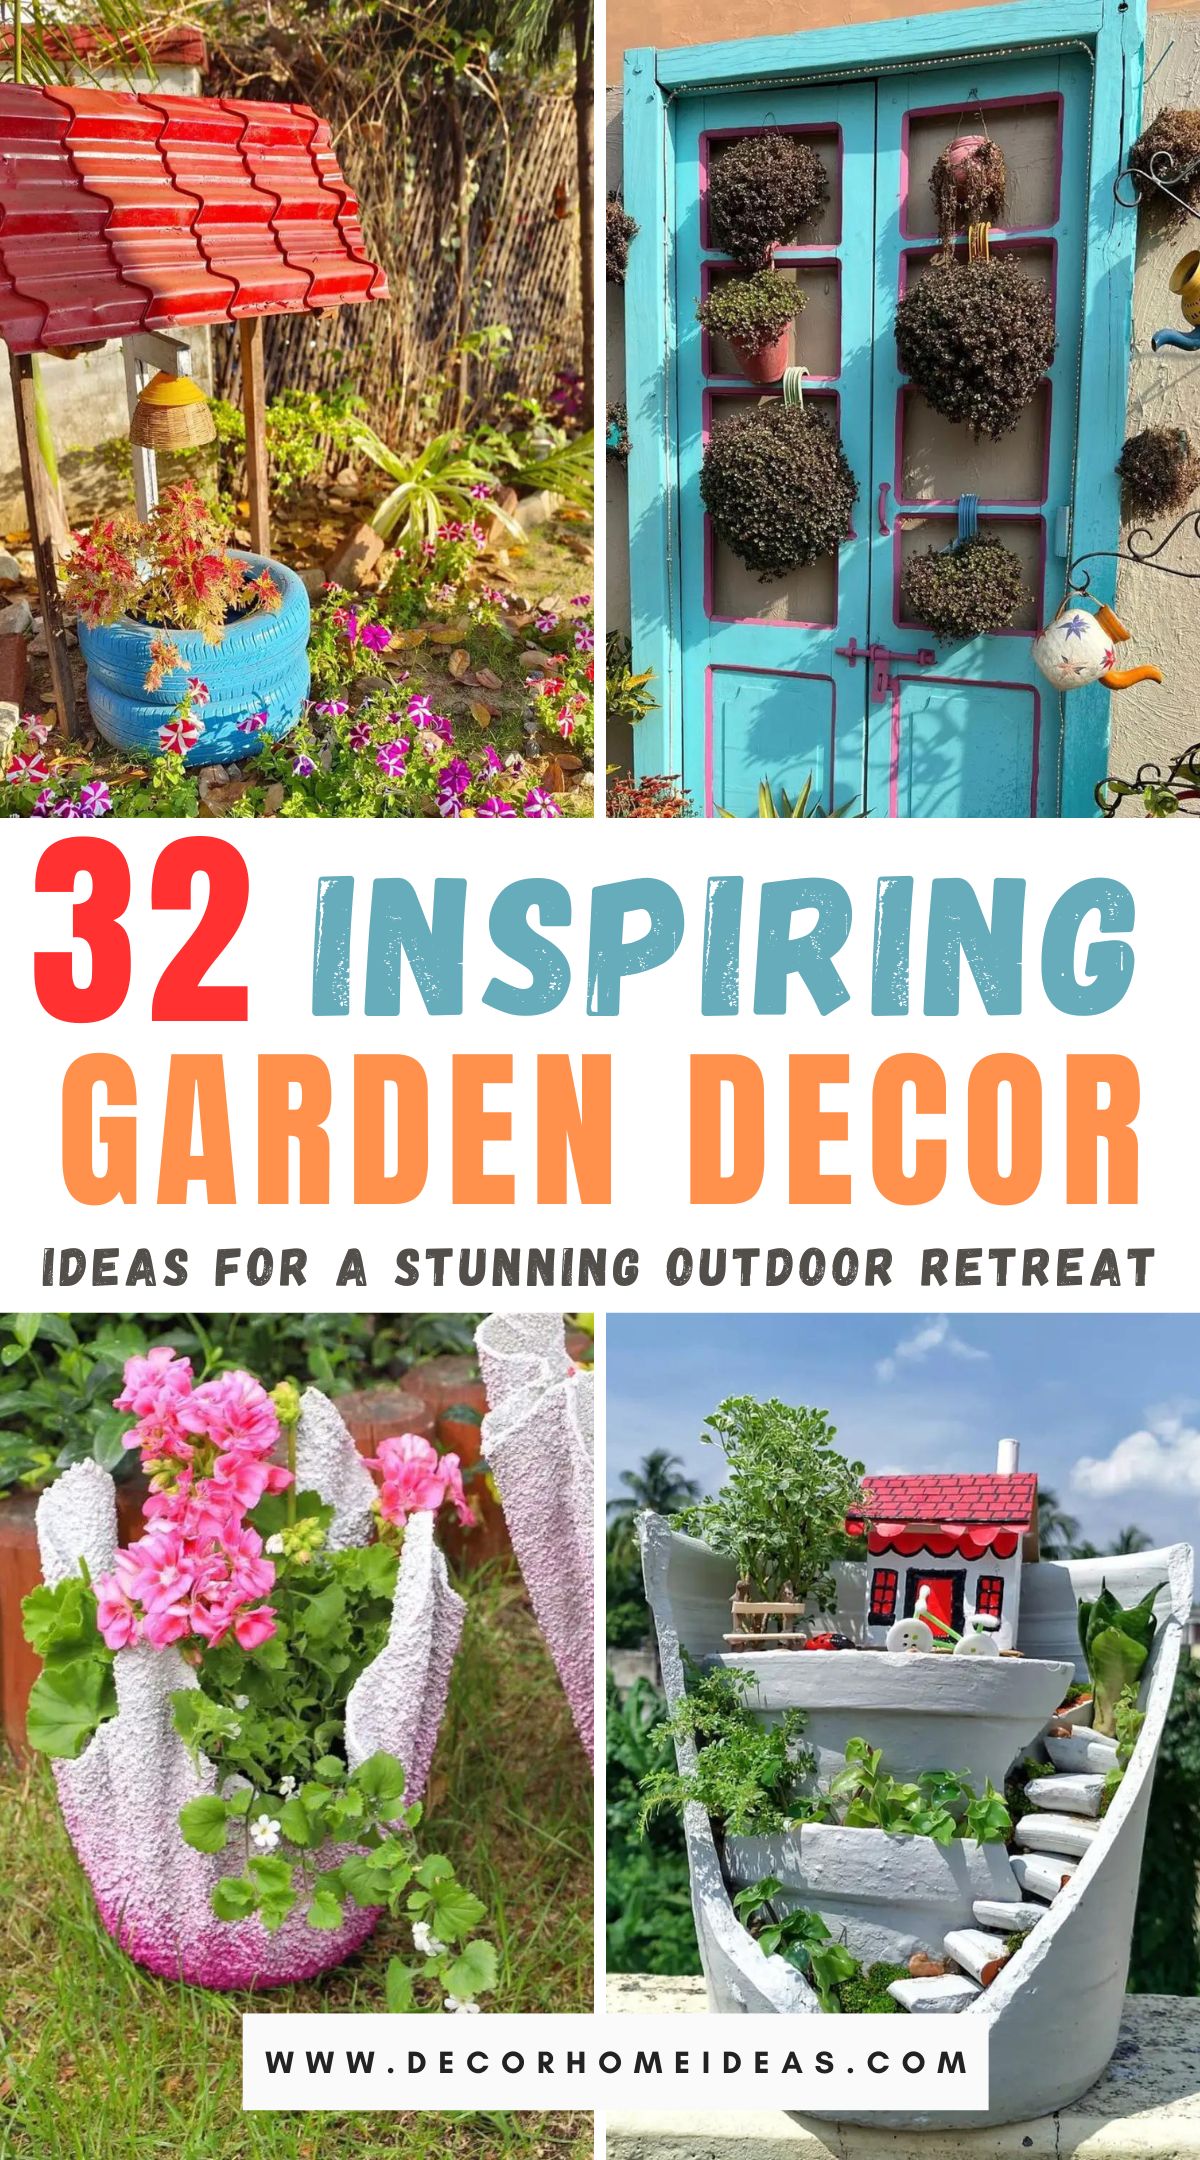 Explore 32 creative garden decor ideas to revitalize your outdoor oasis. From charming ornaments to imaginative landscaping, discover unique inspirations that breathe new life into your garden haven.